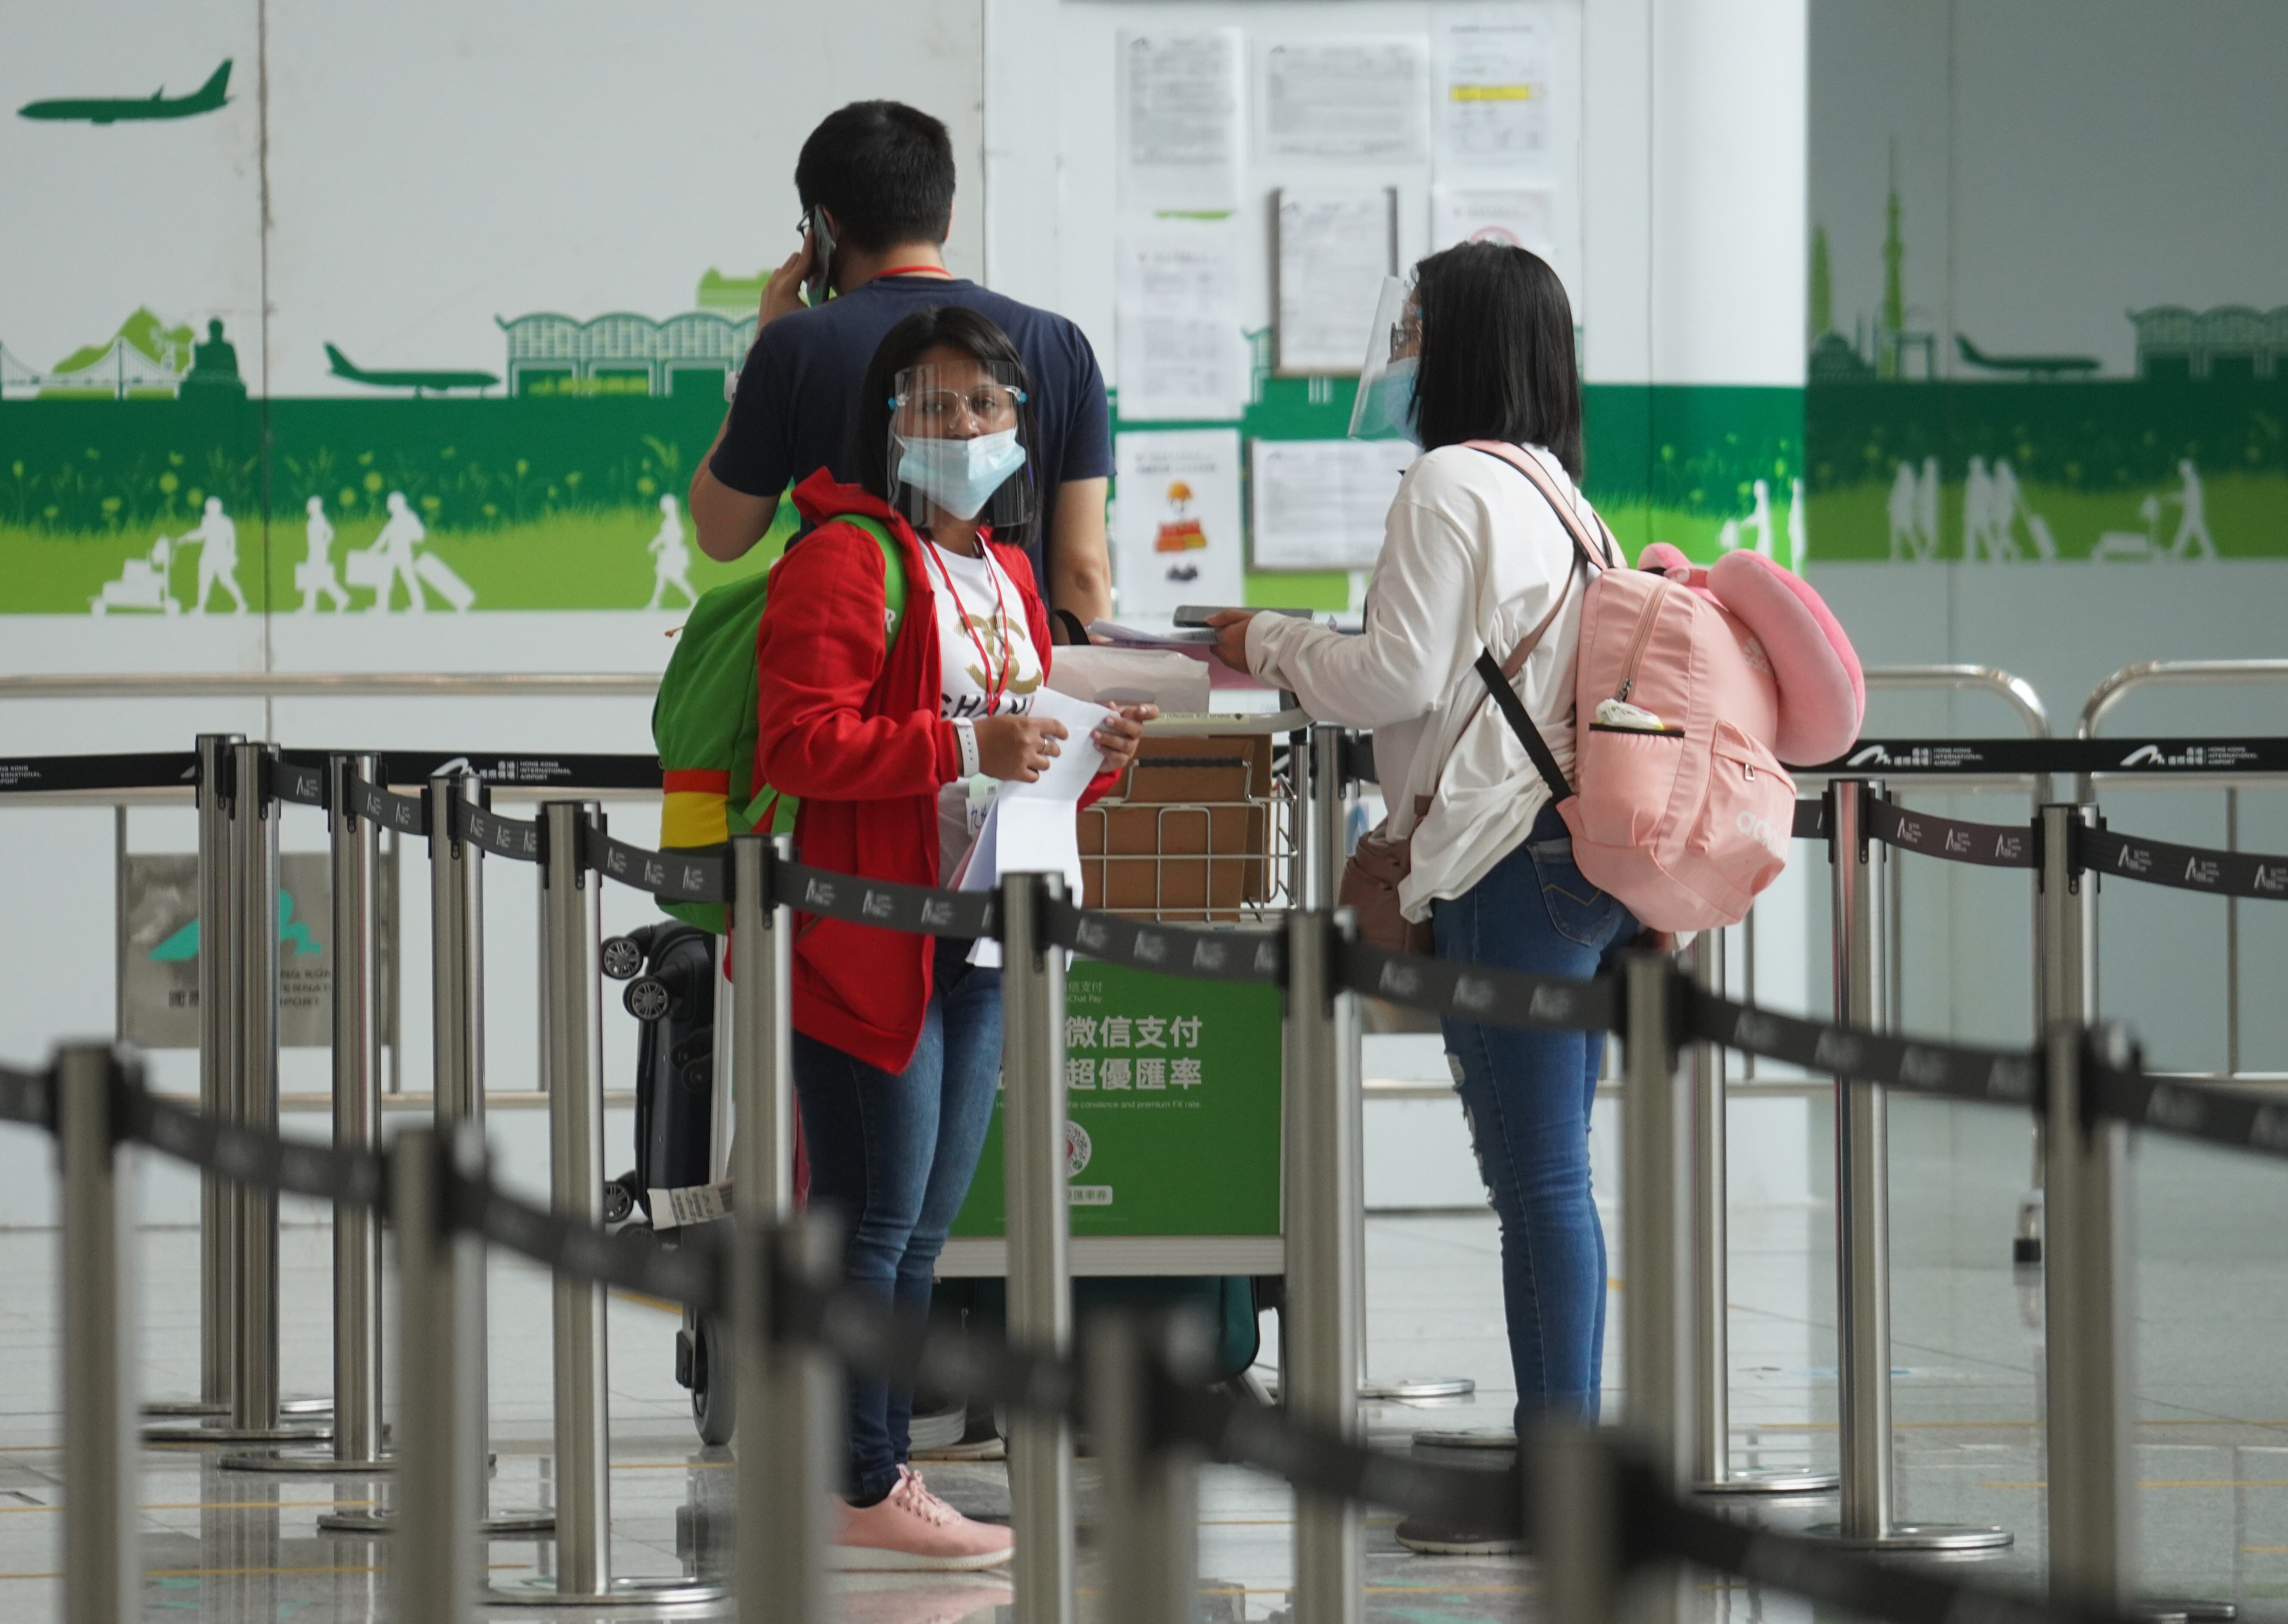 Philippines consul general reveals that discussions were held last week on lifting the direct flight bans for the city’s residents and workers. Photo: SCMP/ Winson Wong